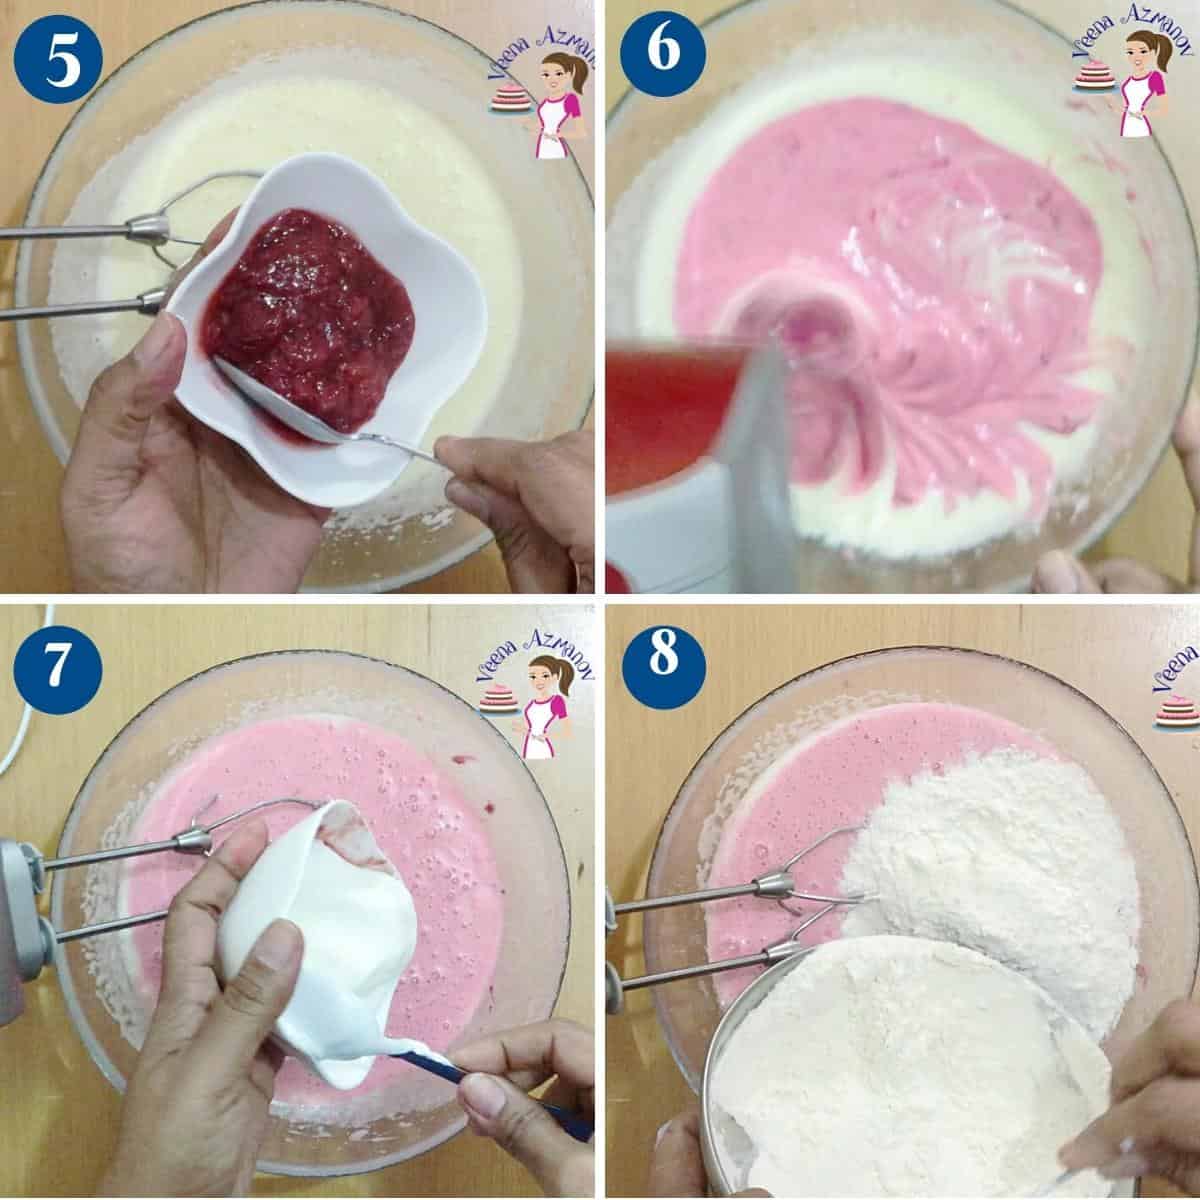 Progress pictures for making strawberry cake batter.